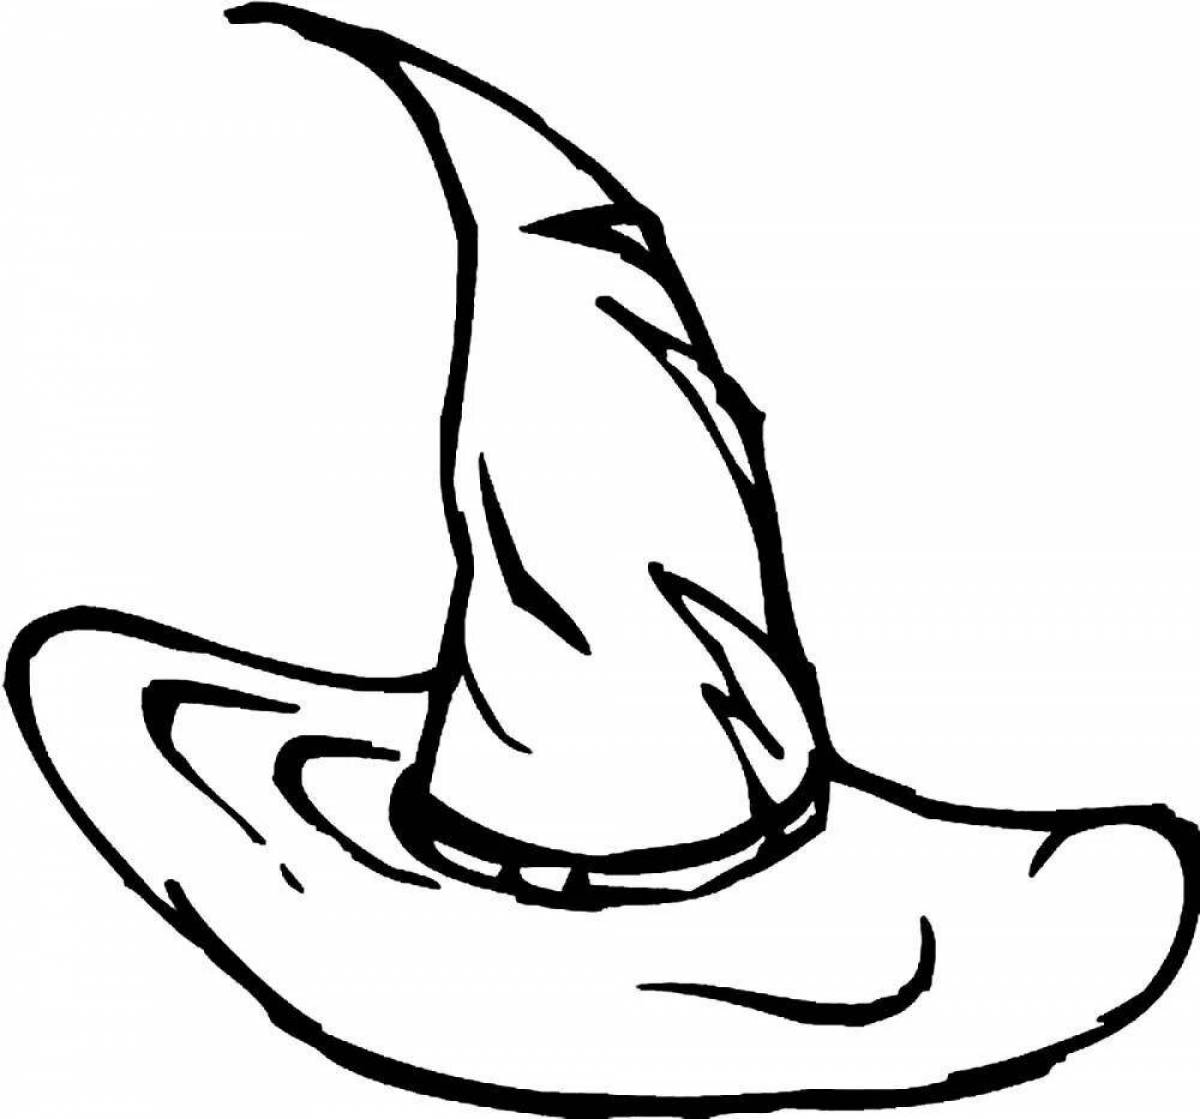 Sorcerer's glittering hat coloring page